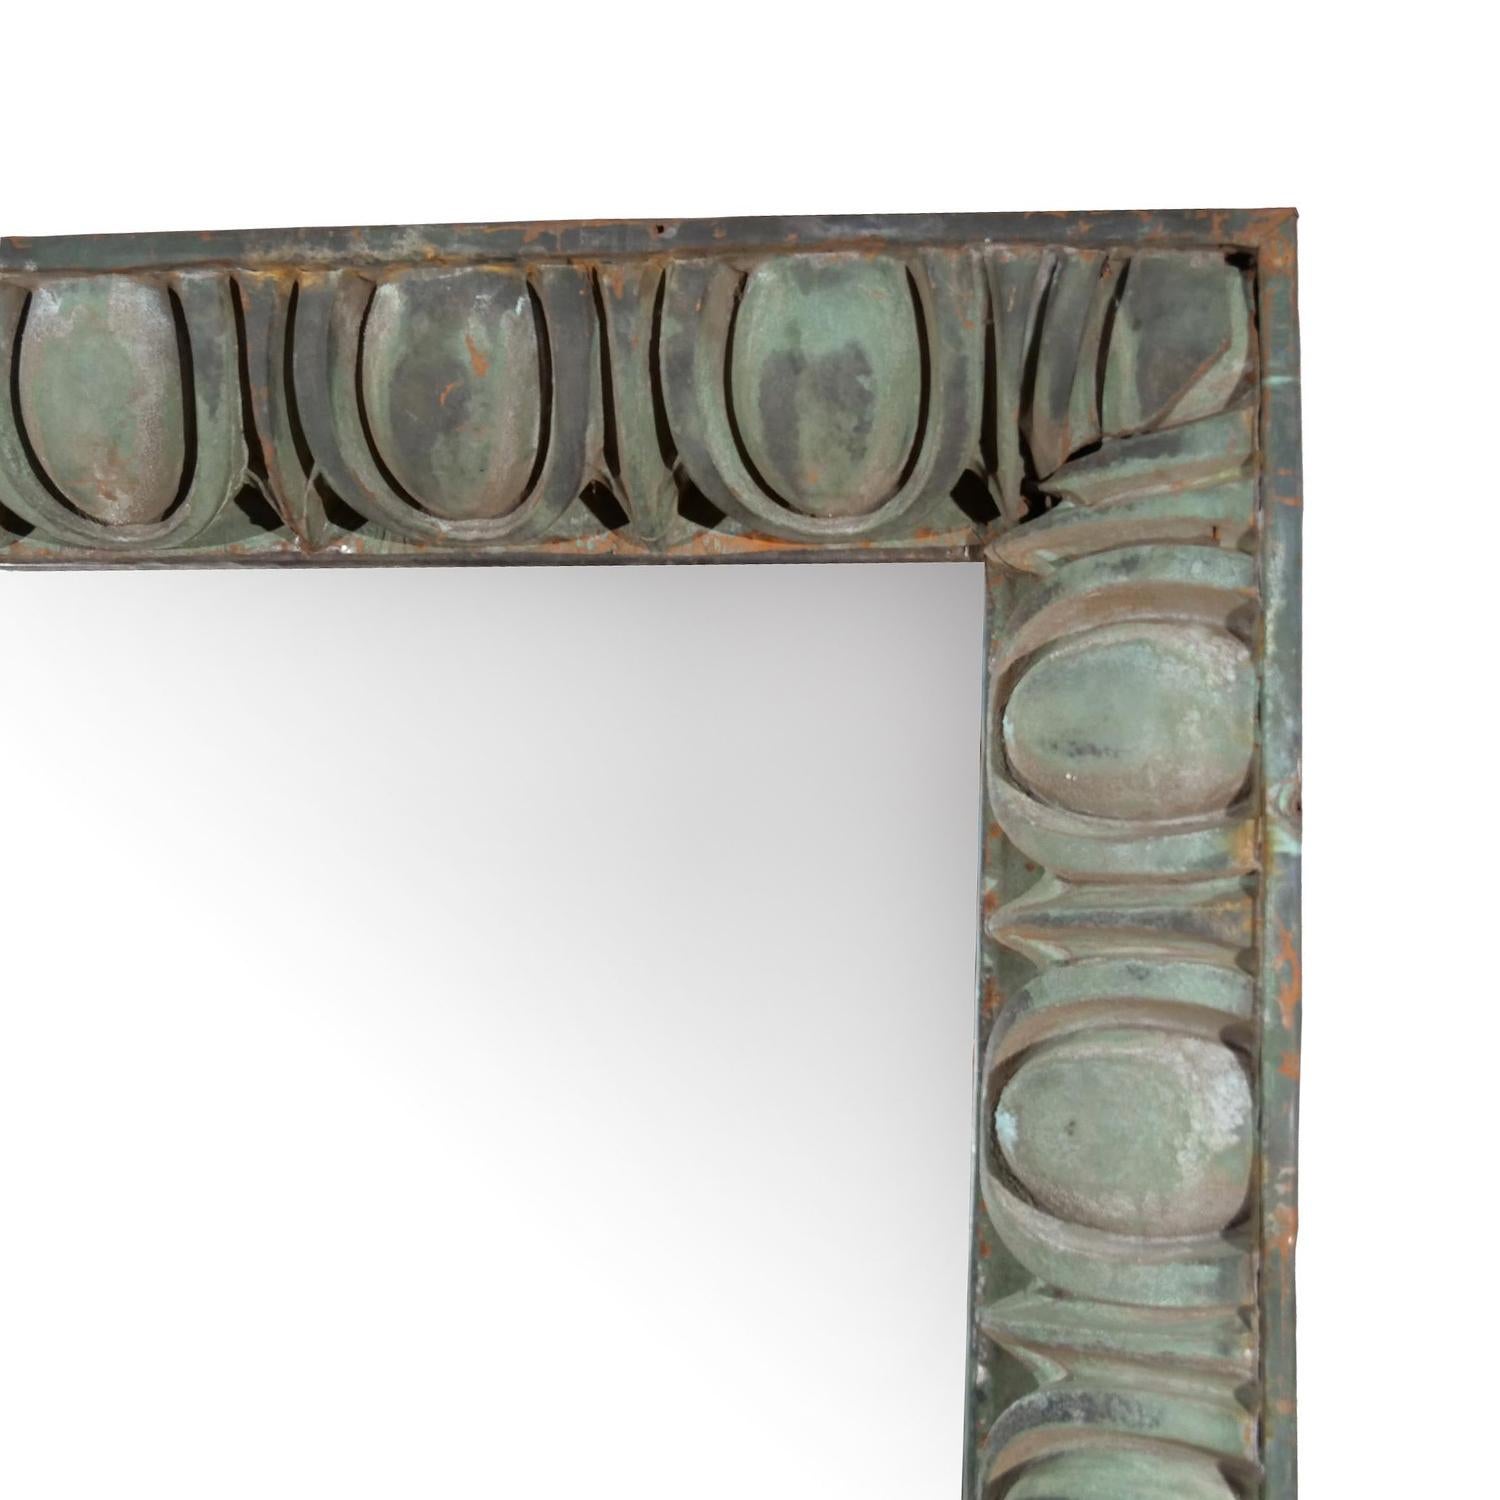 Hand-Crafted 20th Century American Oversized Wall, Floor Mirror from the Rialto Theater